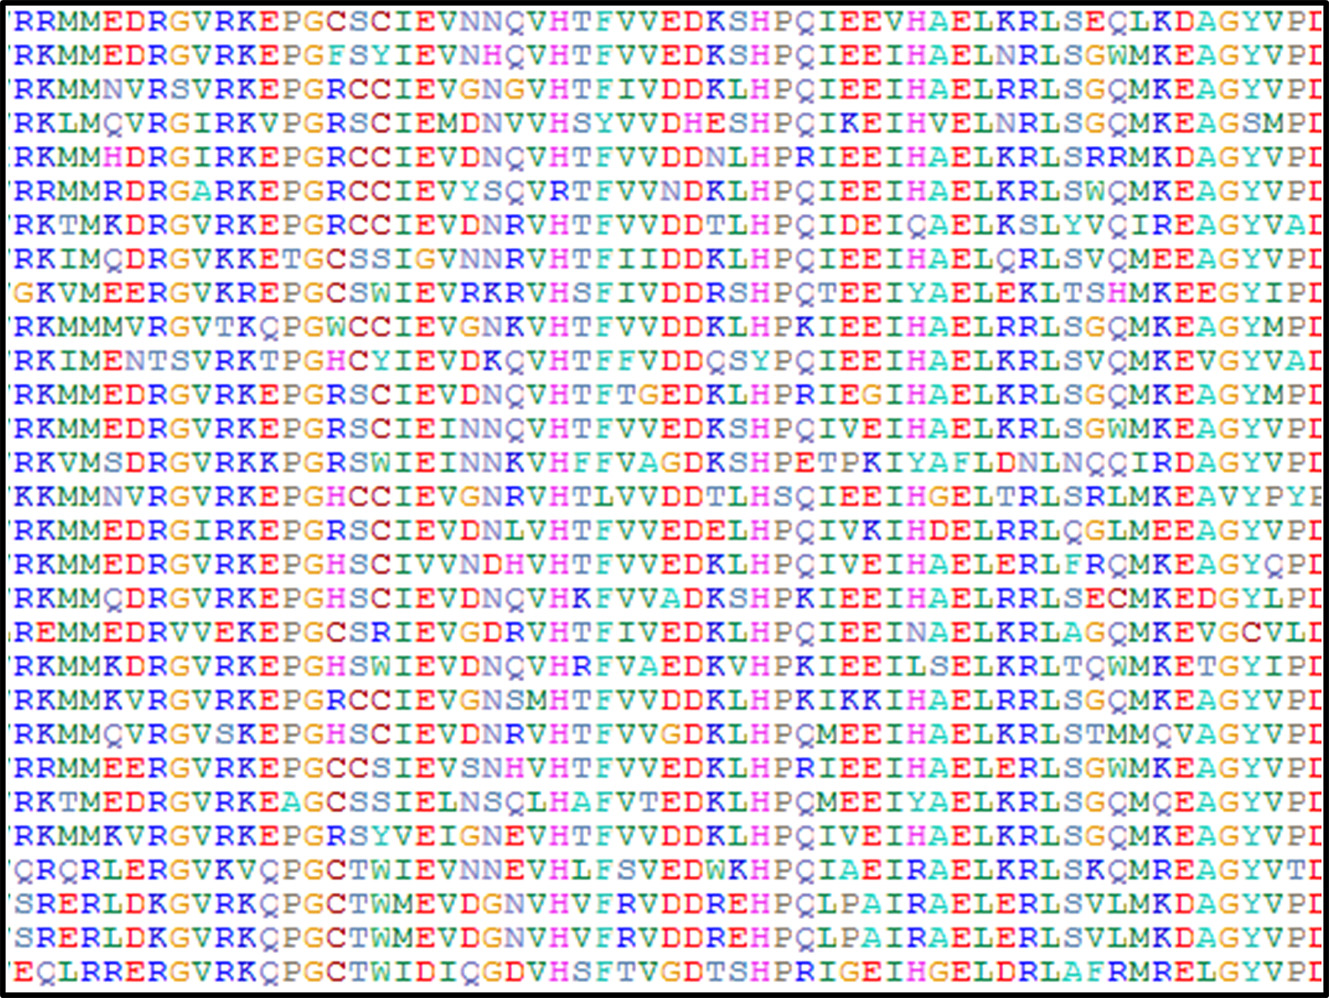 Enlarged view: Alignement of PPR protein sequences